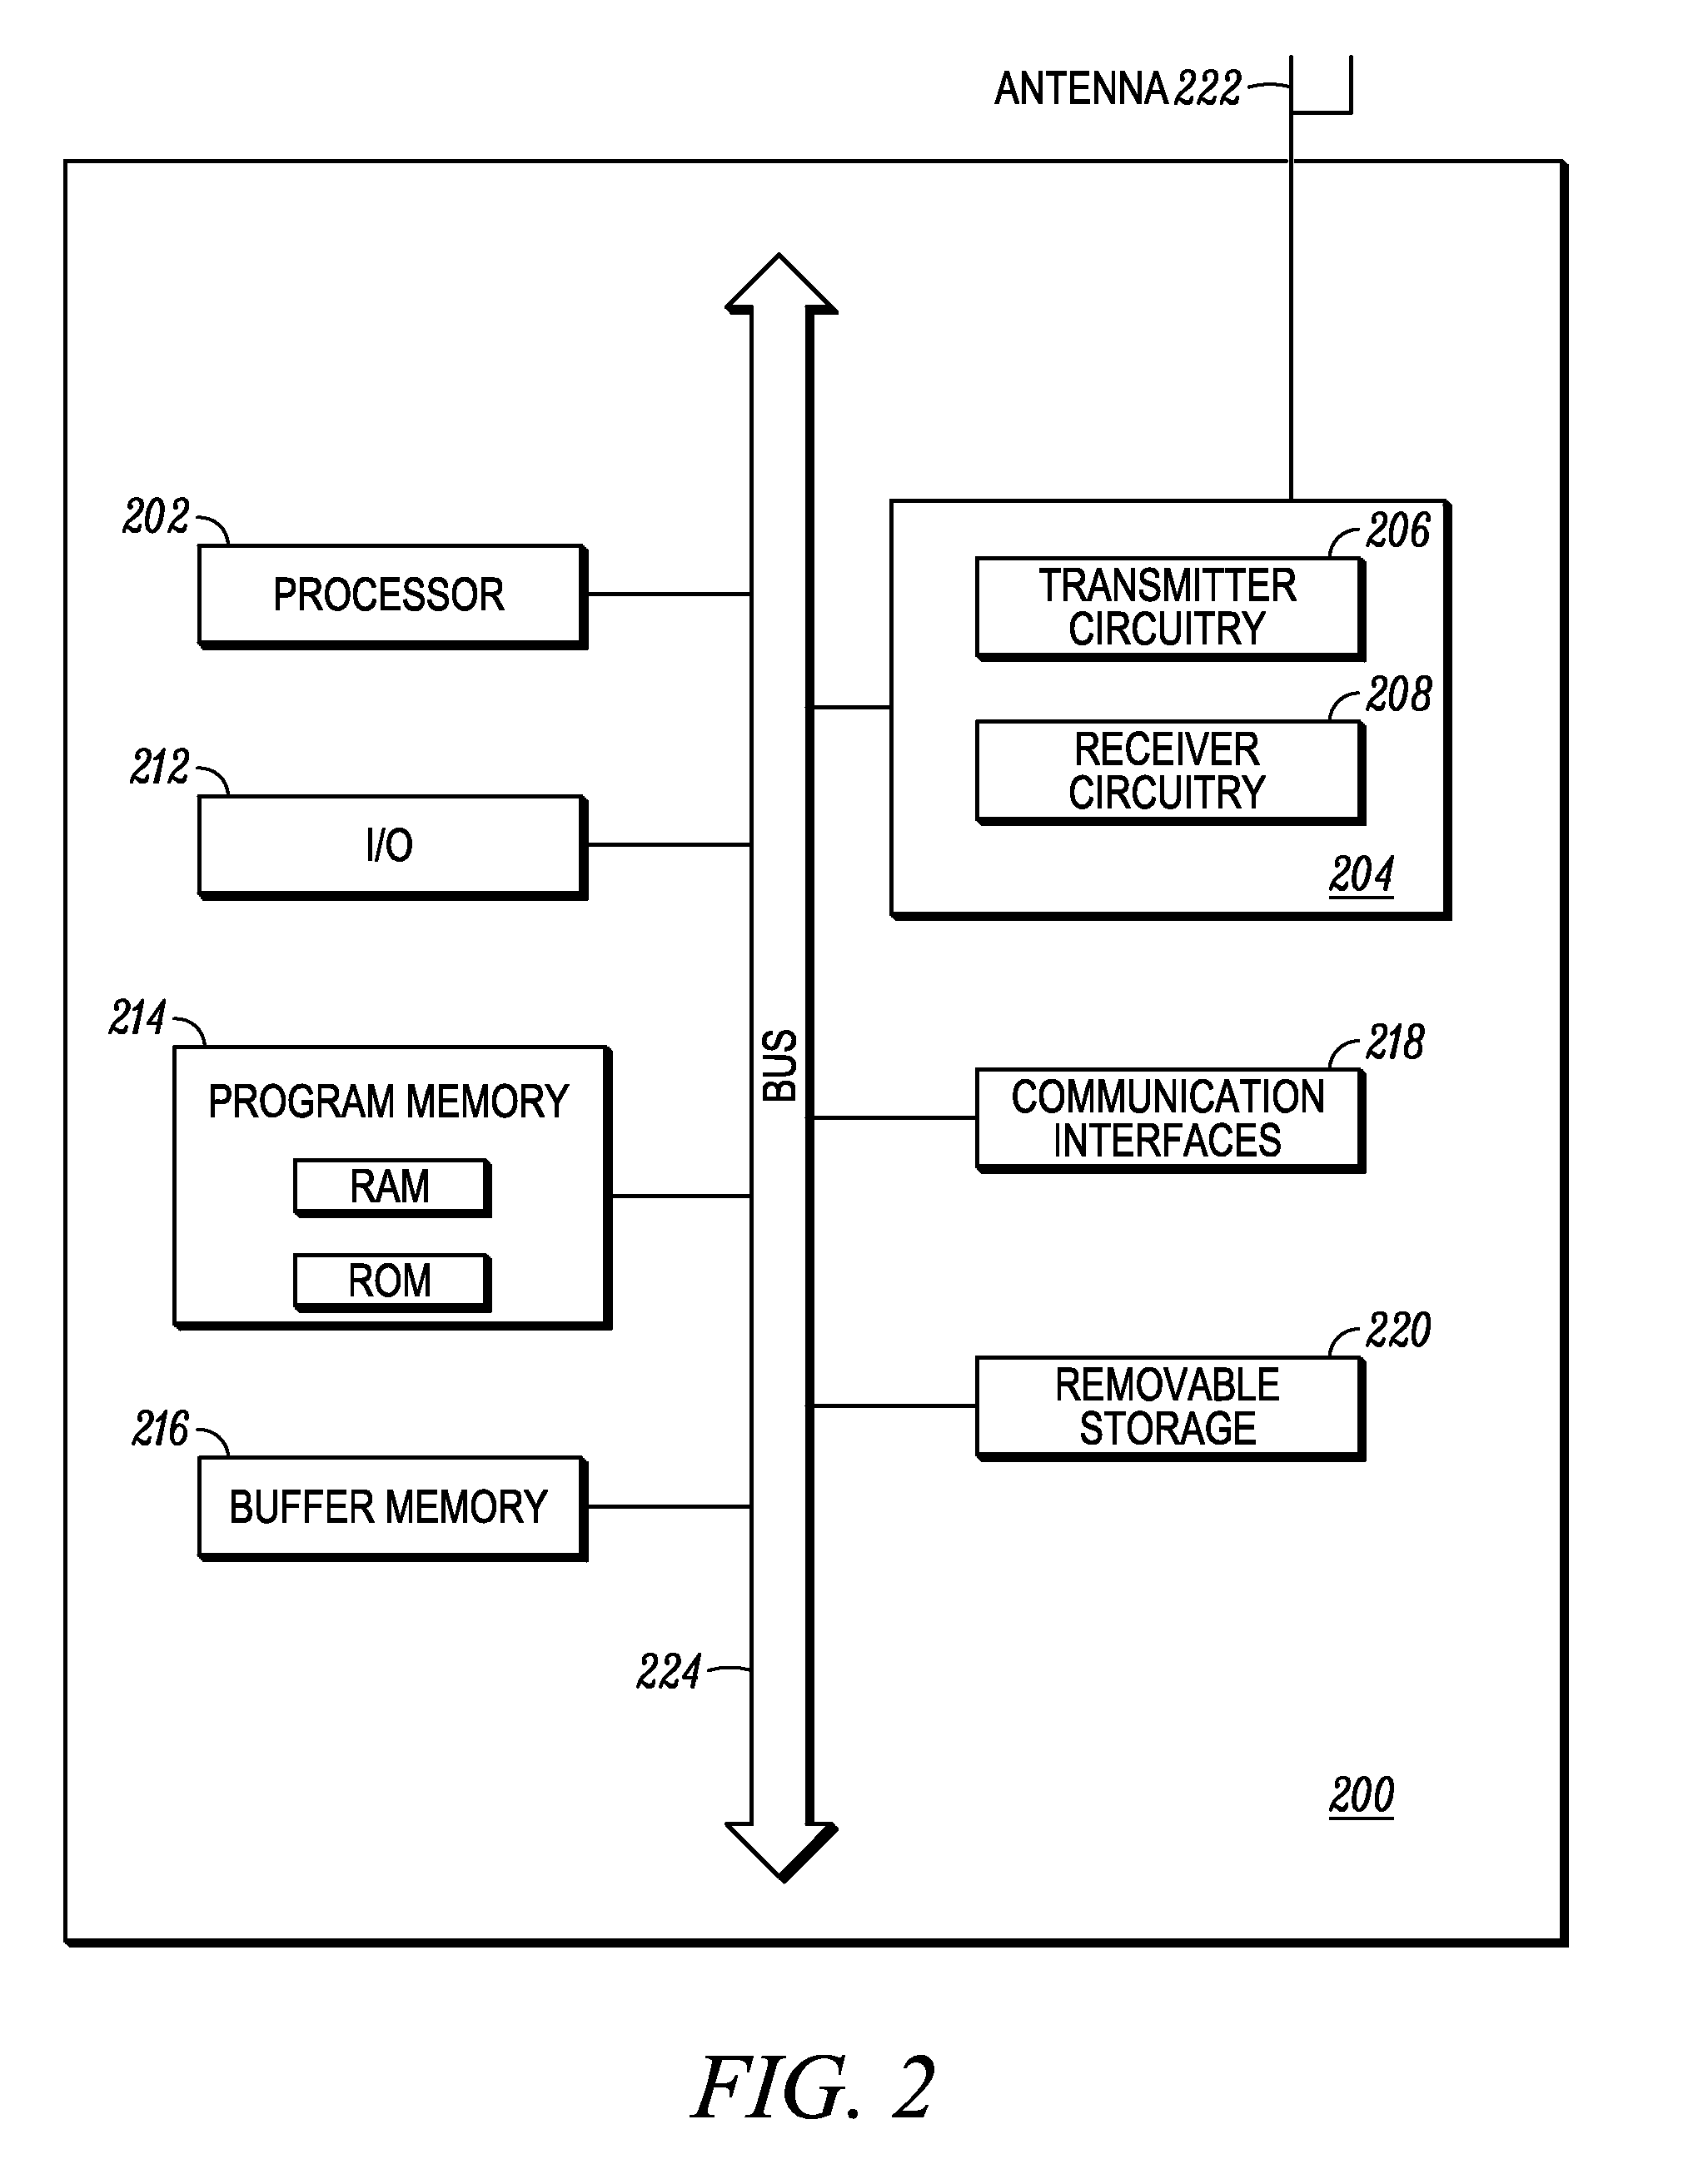 Method of controlling sharing of participant identity in a group communication session